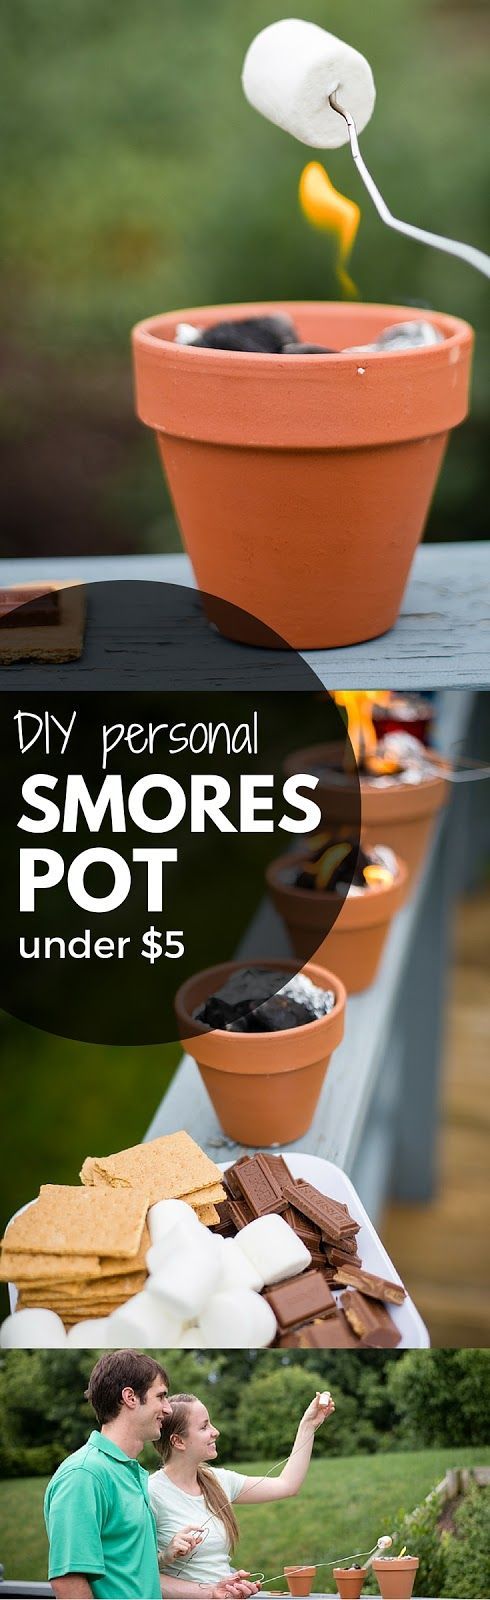 DIY personal smores pots are perfect for backyard entertaining or summer smore p...